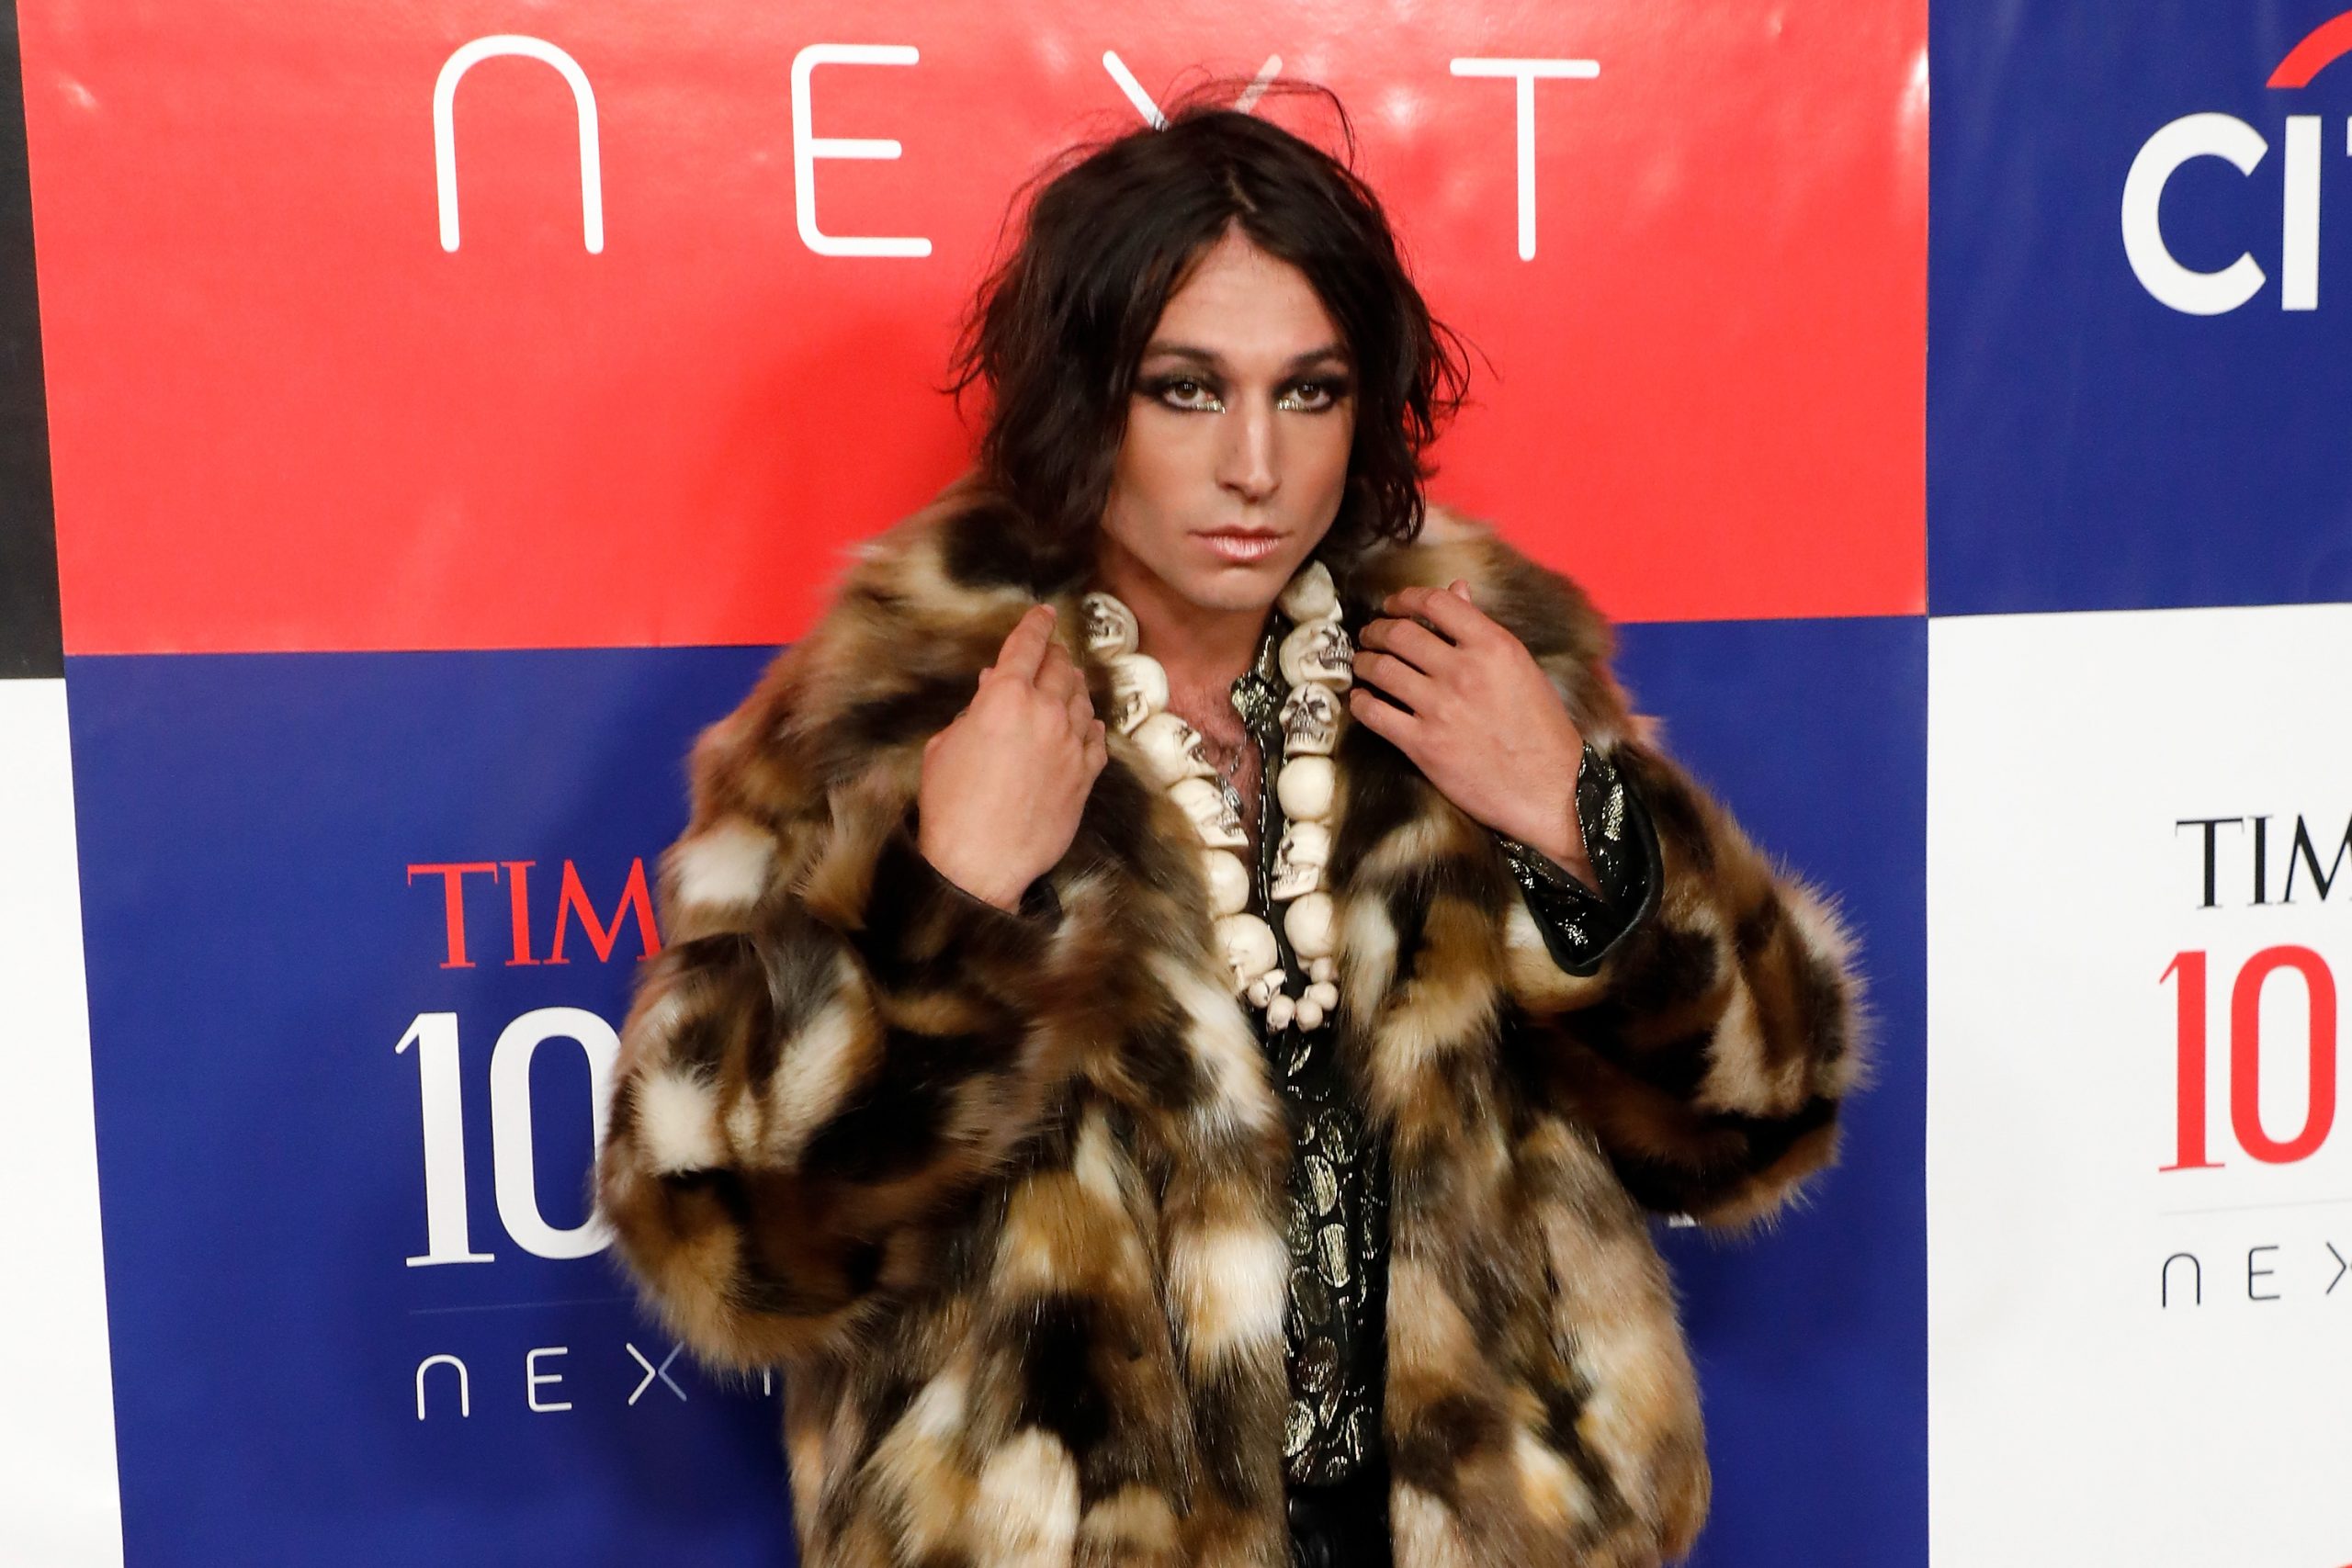 Ezra Miller attends Time 100 Next in 2019. Miller's behavior in recent years includes choking a woman at a bar, second degree assault charges in Hawaii, and a confrontation with a German woman in 2022.